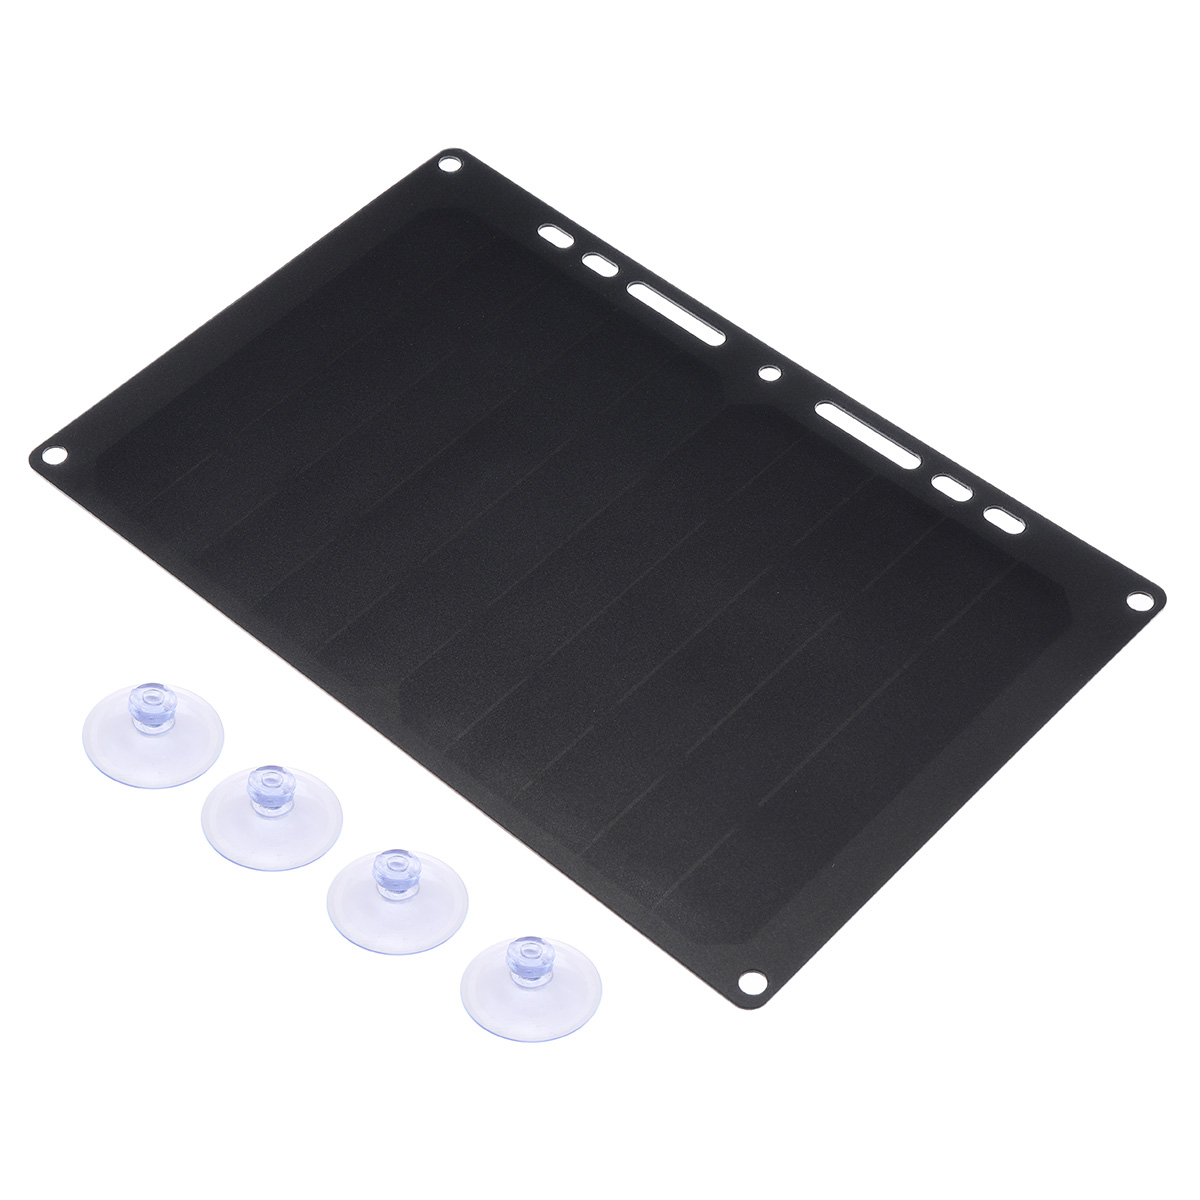 5V 10W Portable Ultra-thin Solar Panel Solar Power USB Charger with Sucker 7